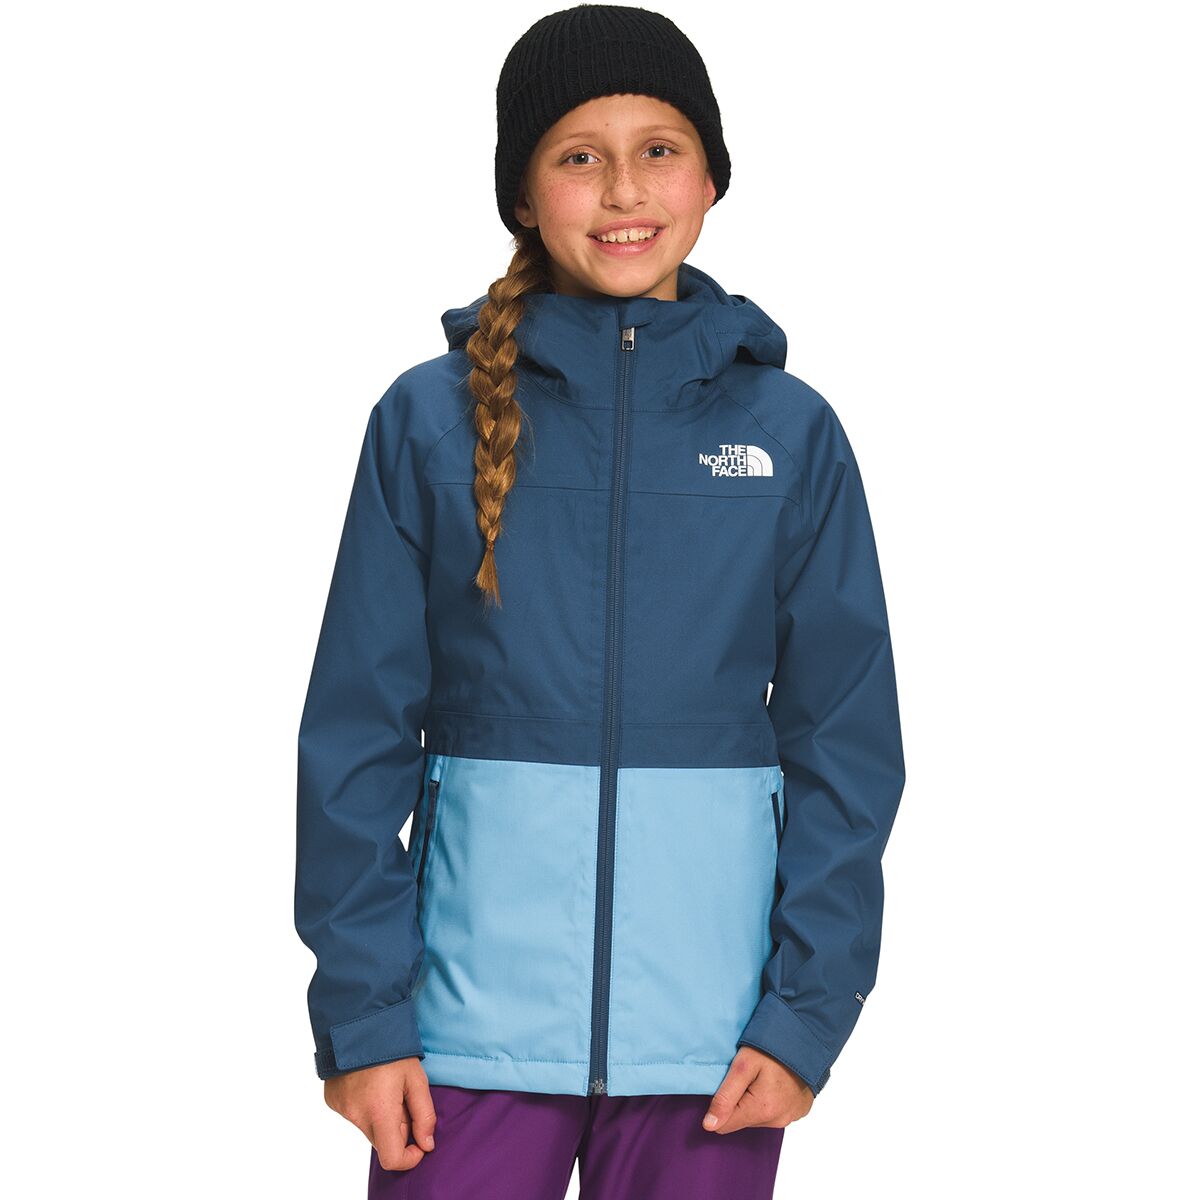 The North Face Vortex Triclimate Jacket - Girls' - Kids